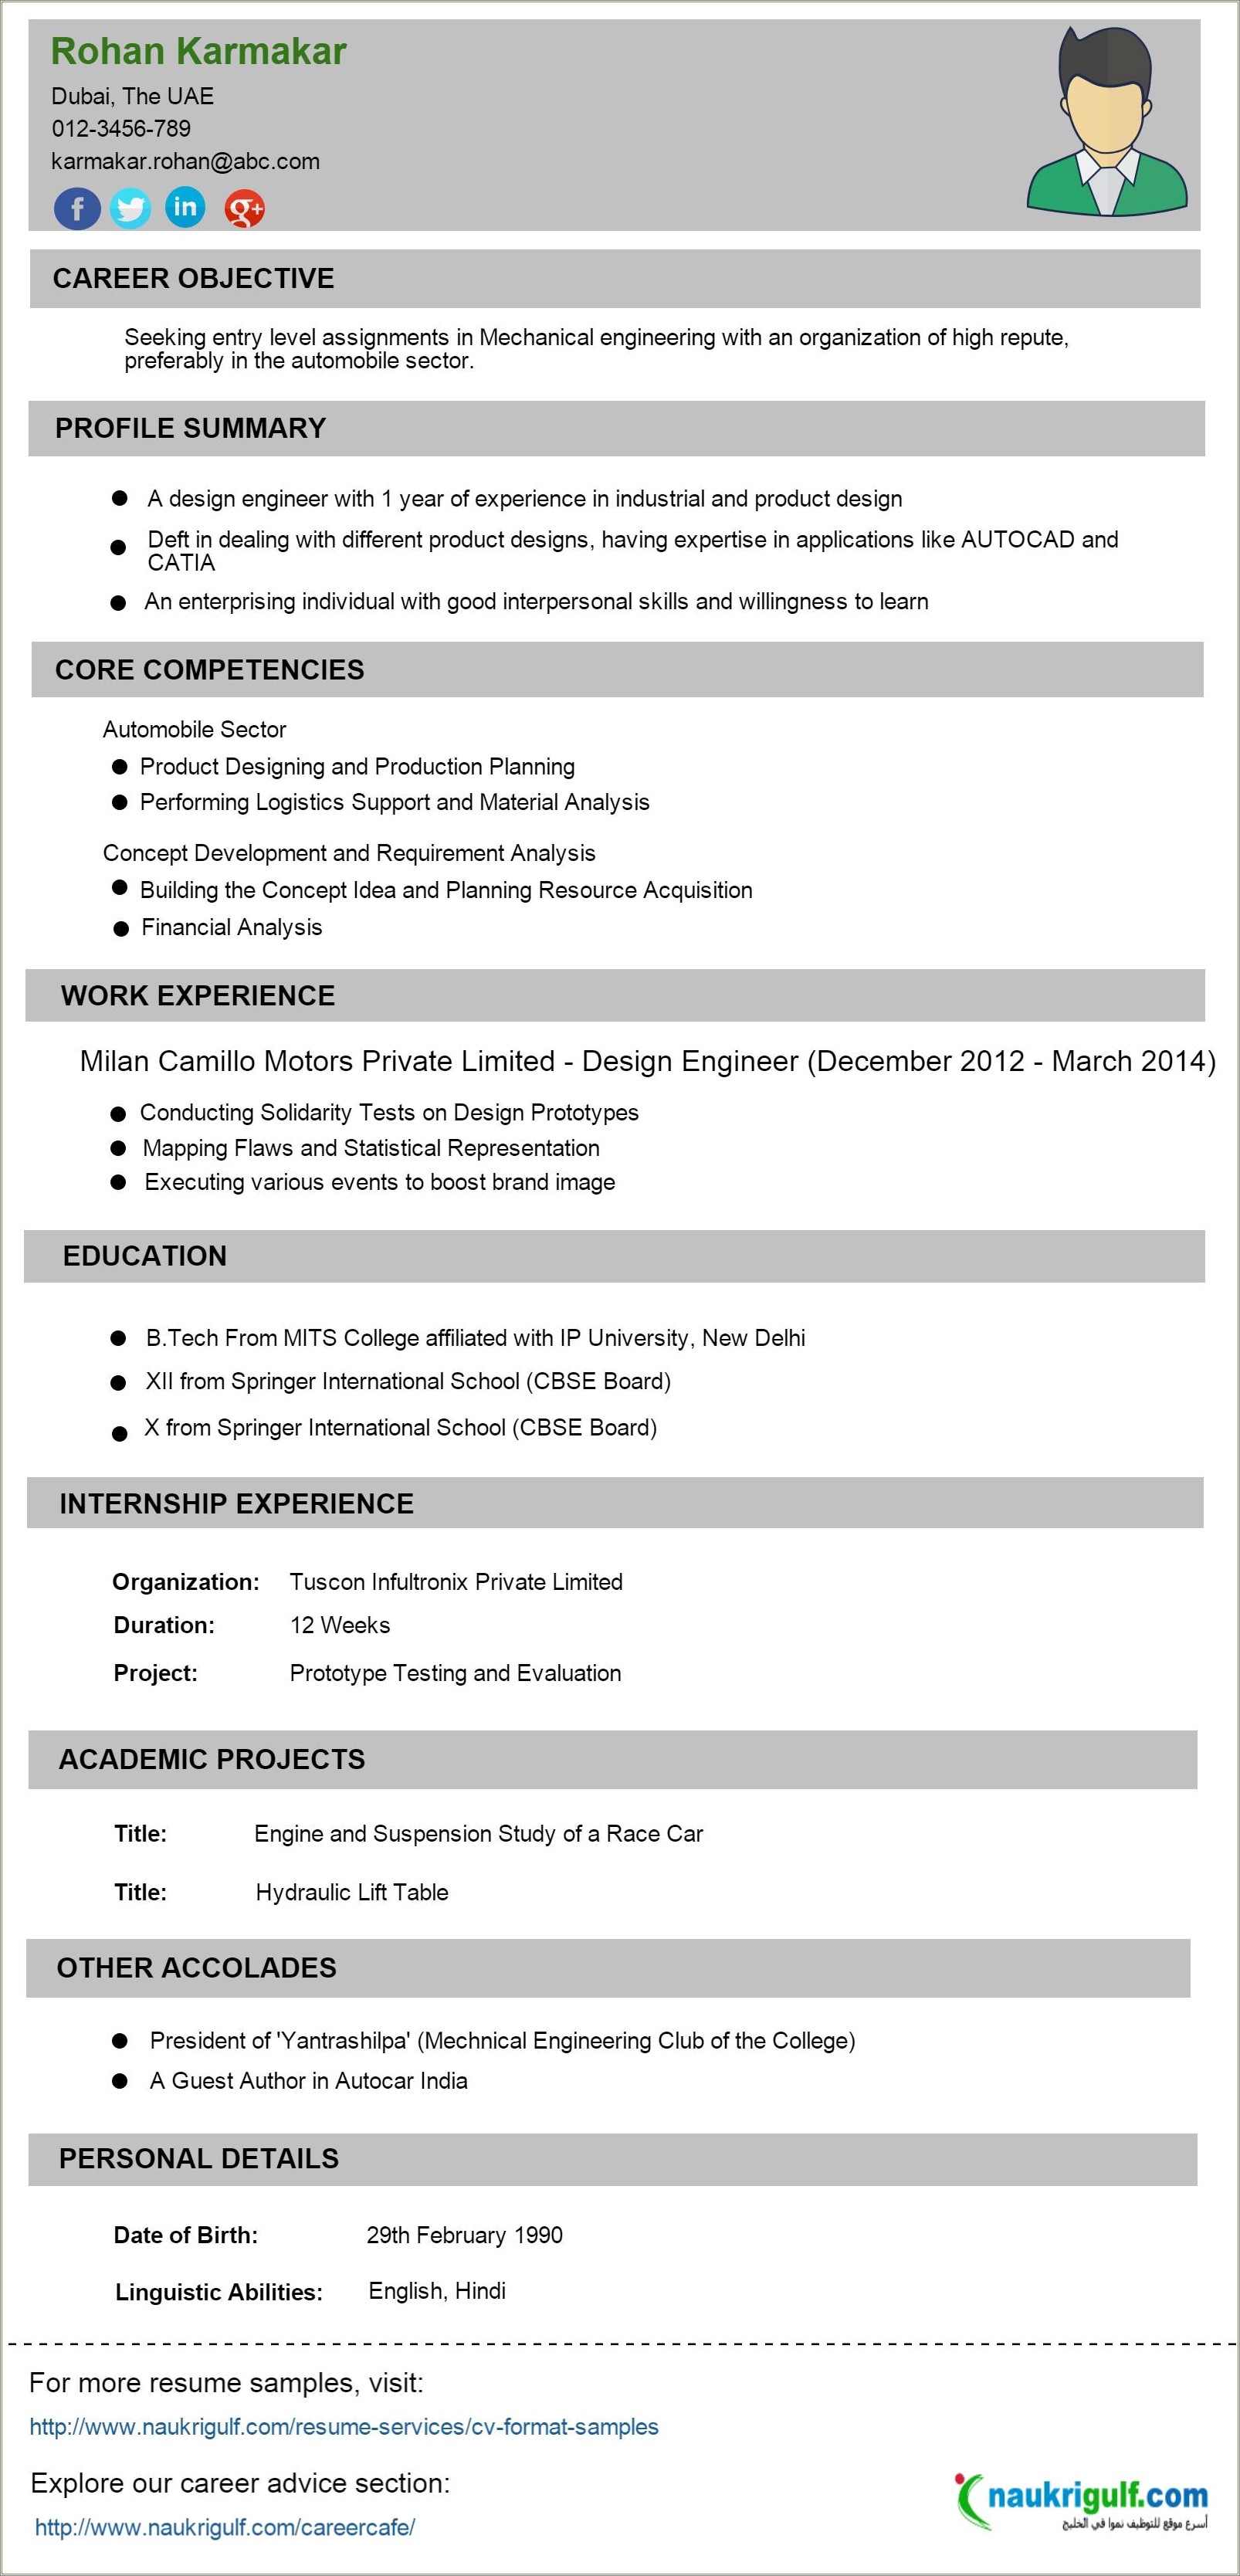 Experience Resume Format For Civil Engineer